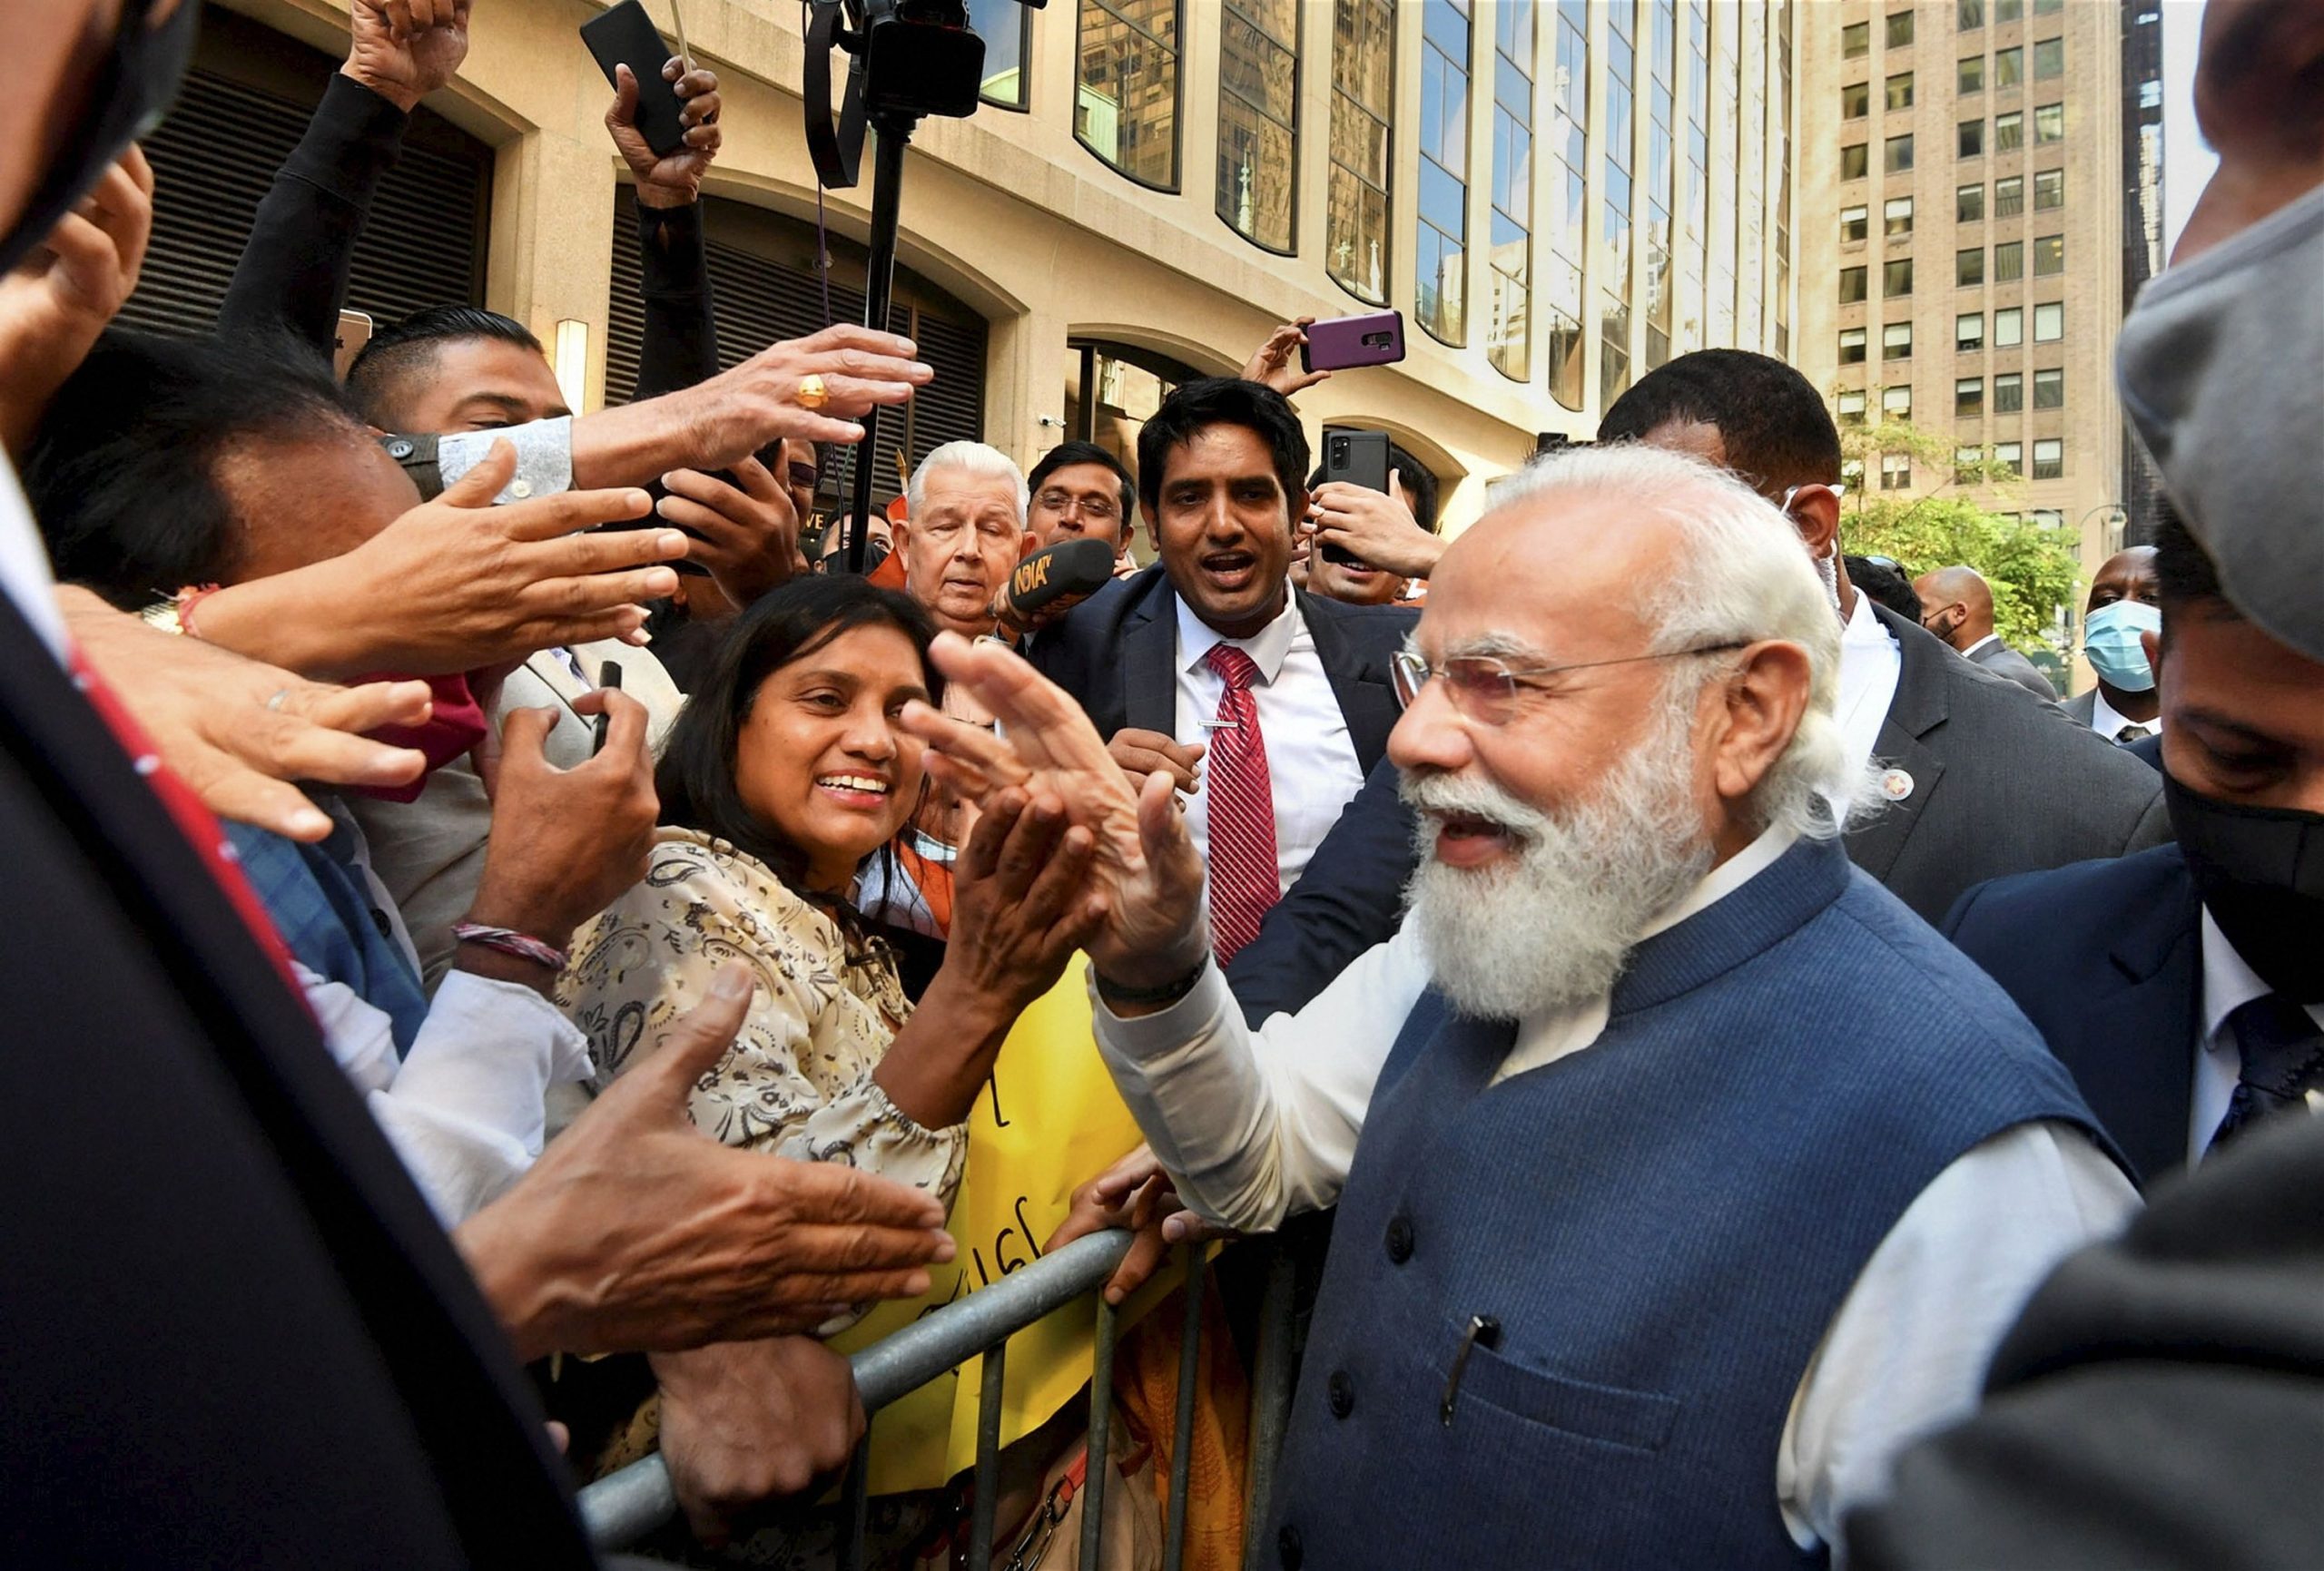 65 hours, 20 meetings- PM Modi’s jampacked schedule at the US tour